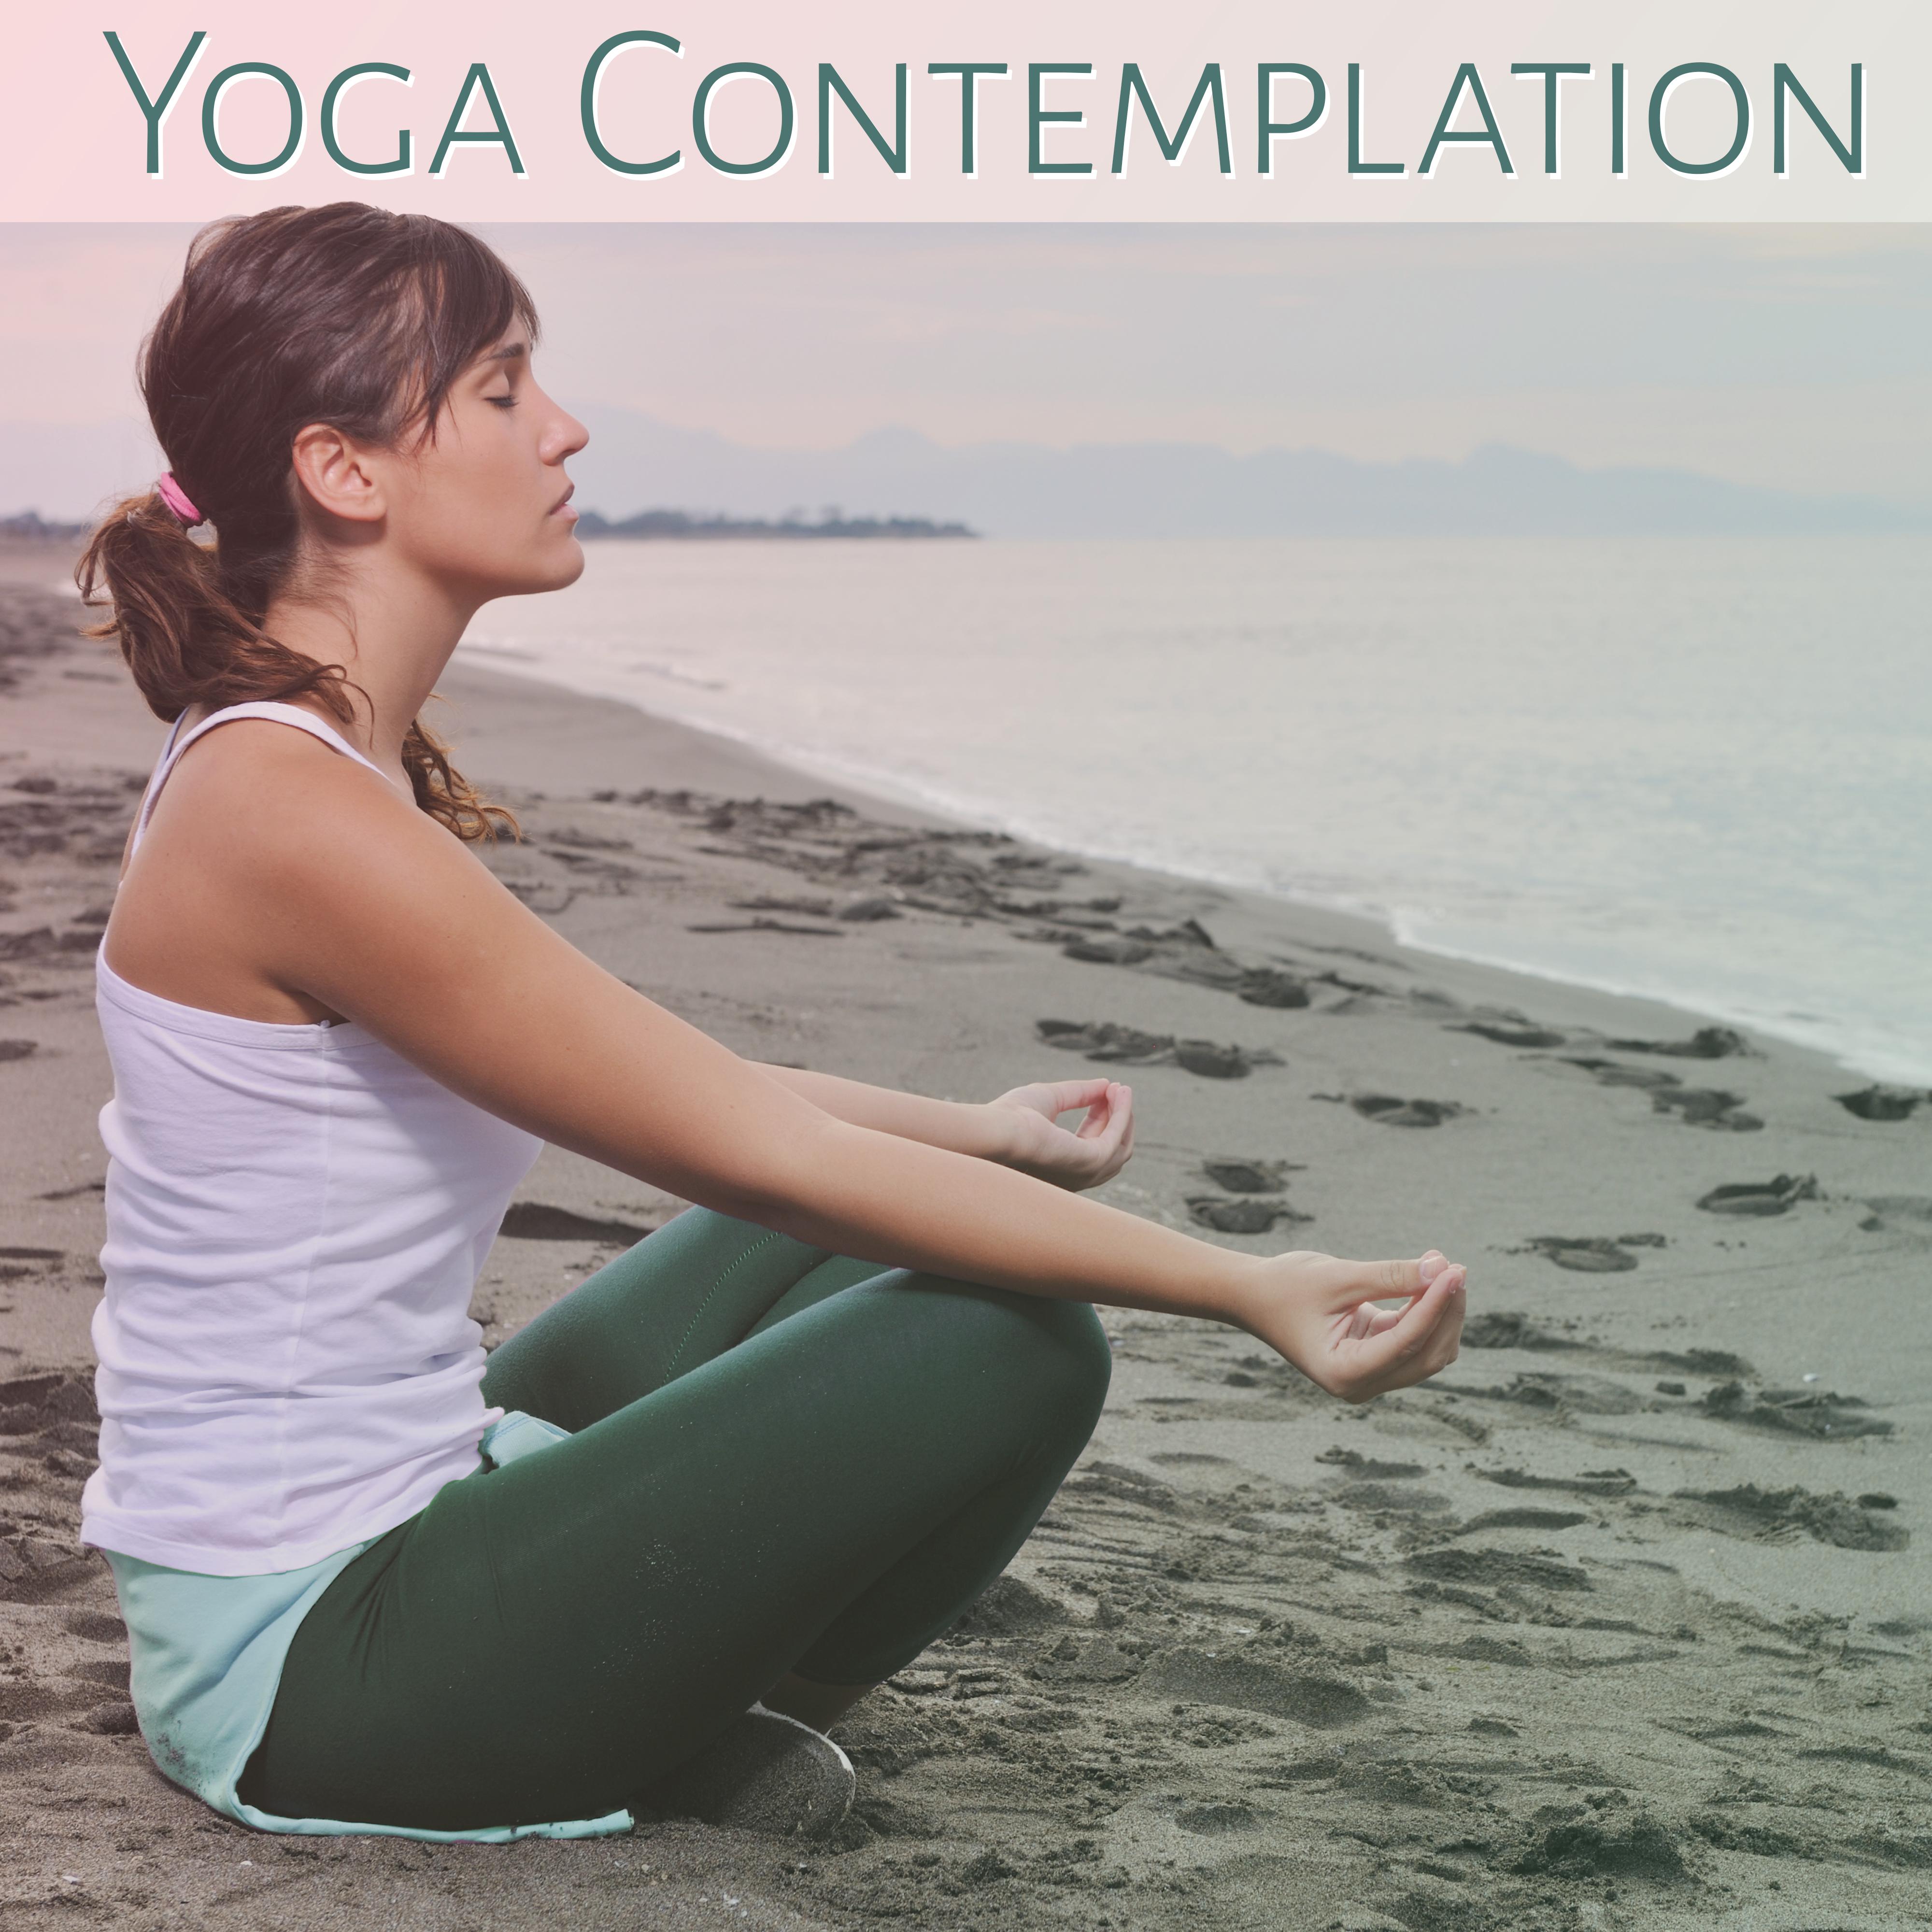 Yoga Contemplation  Nature Sounds for Meditation, Yoga Sounds, New Age, Mystical Experience